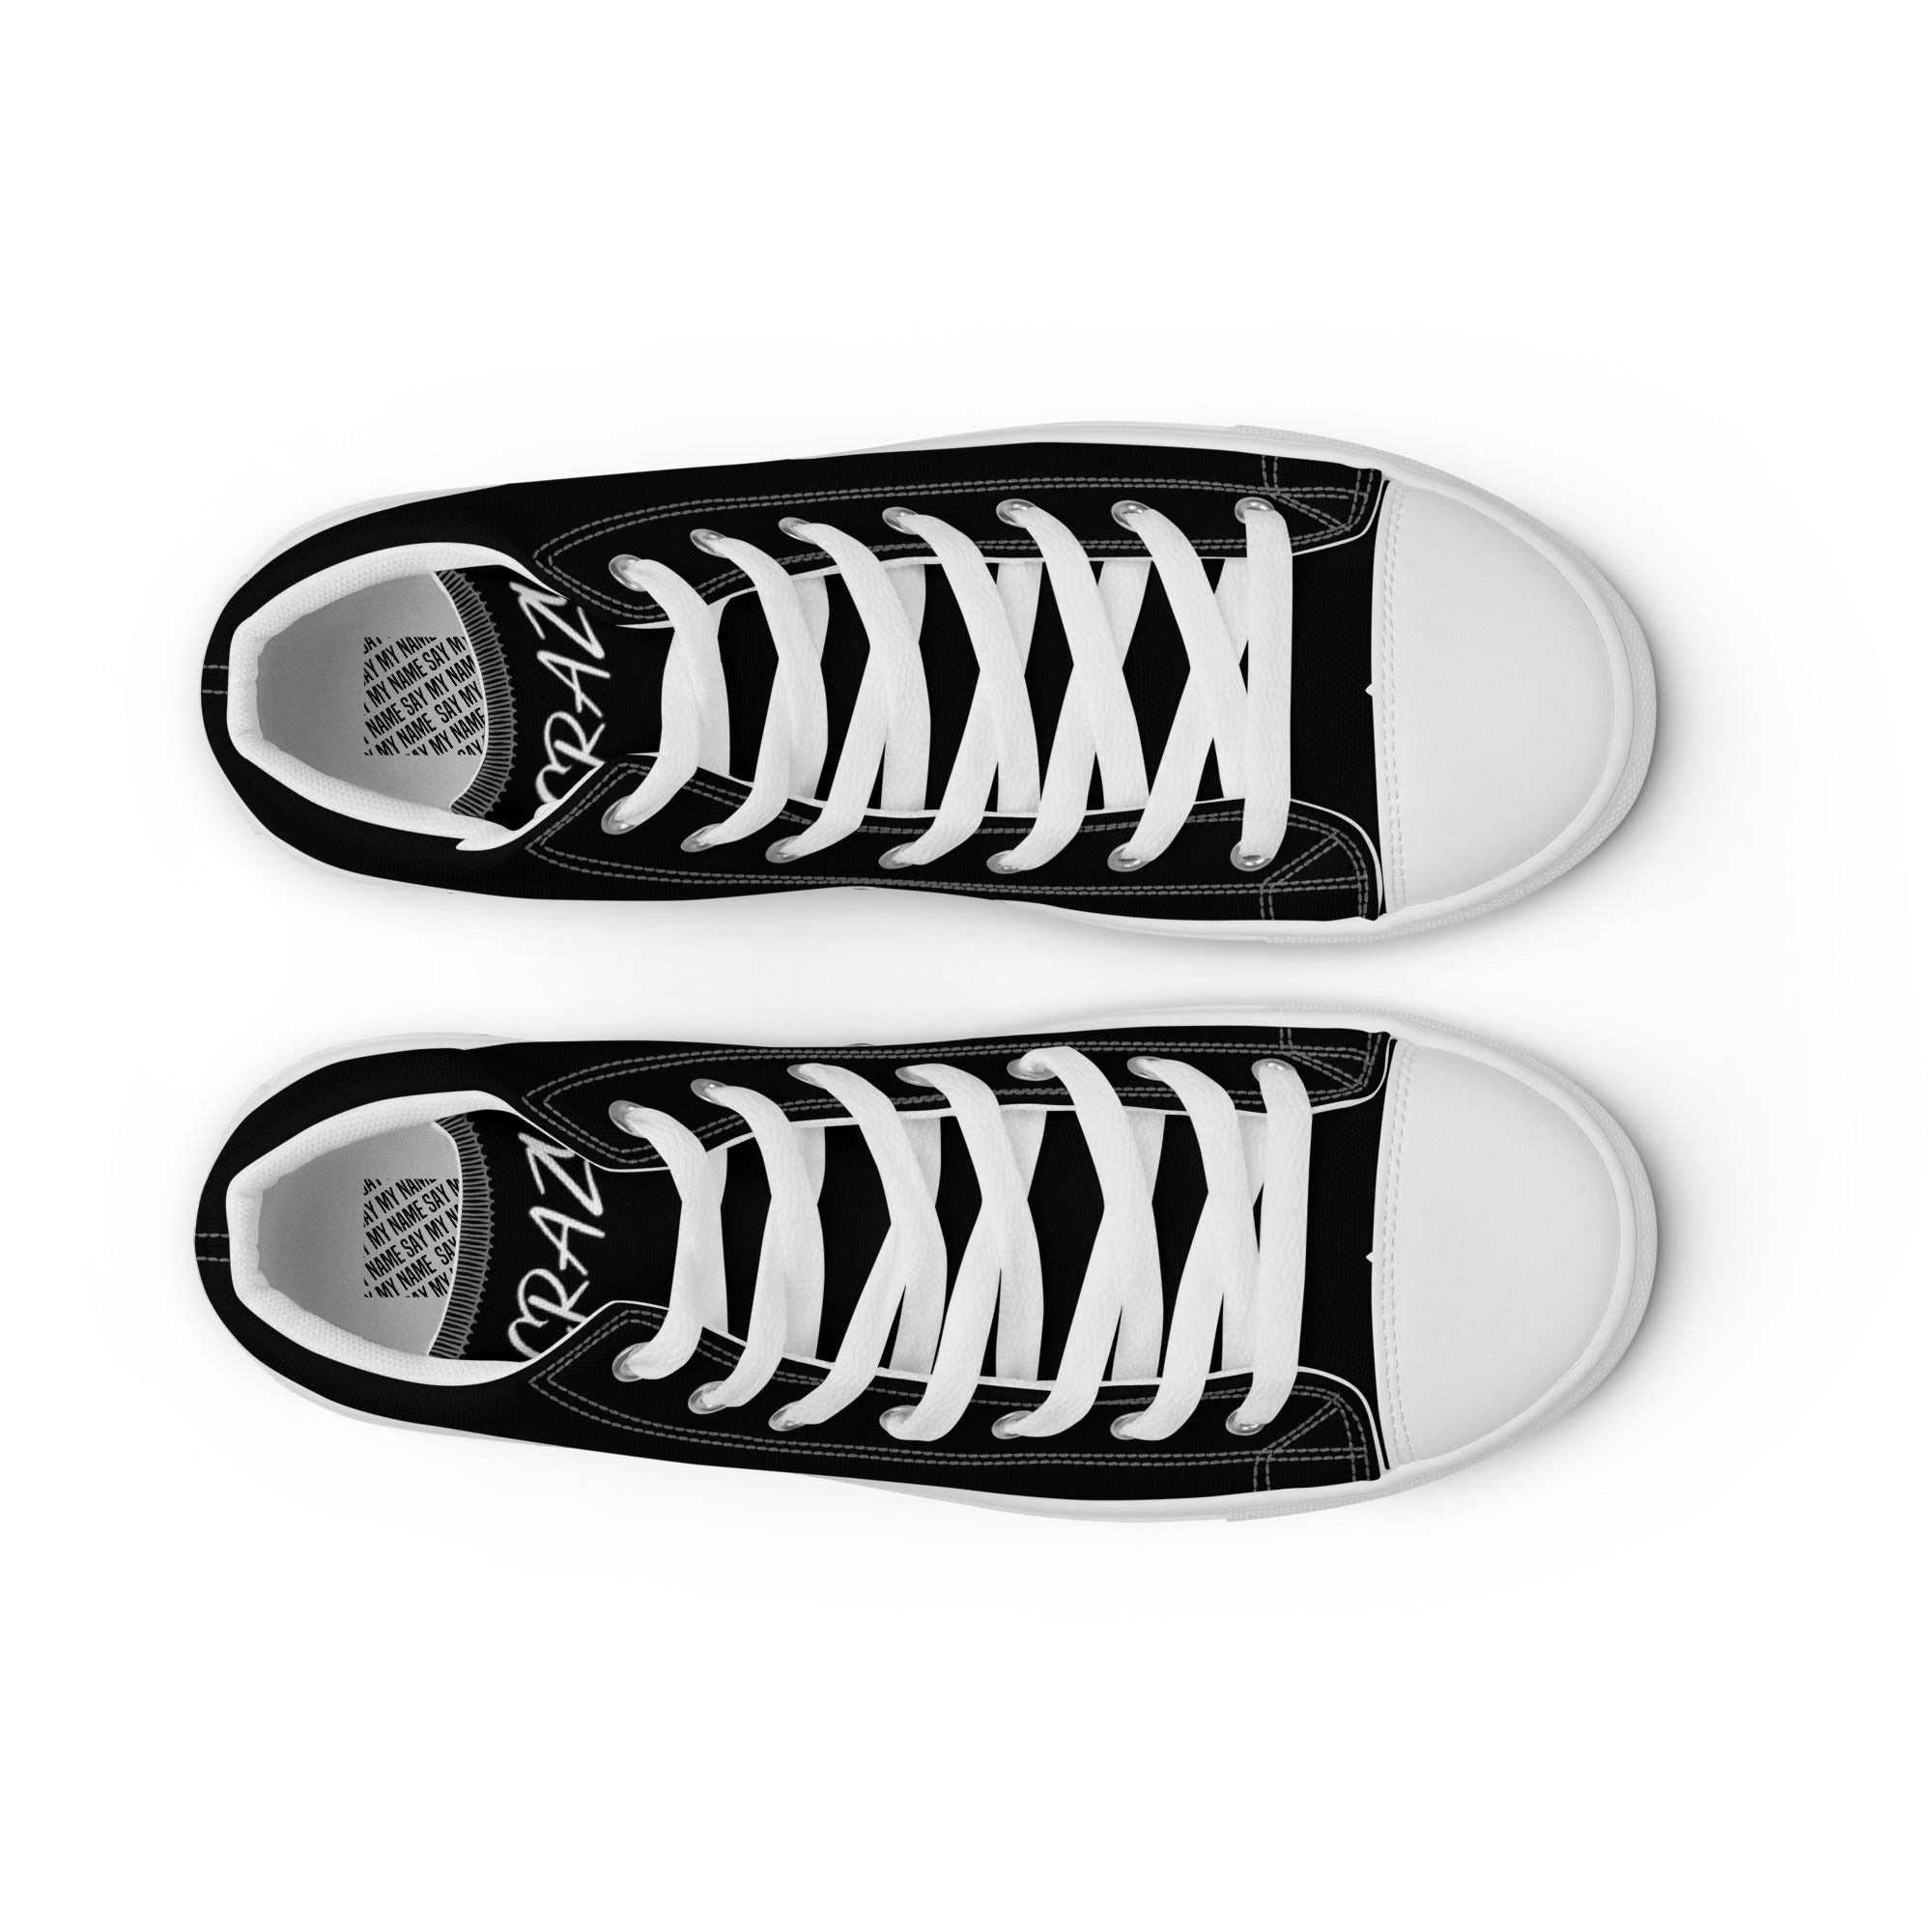 "SAY MY NAME" men's high-top black canvas sneakers